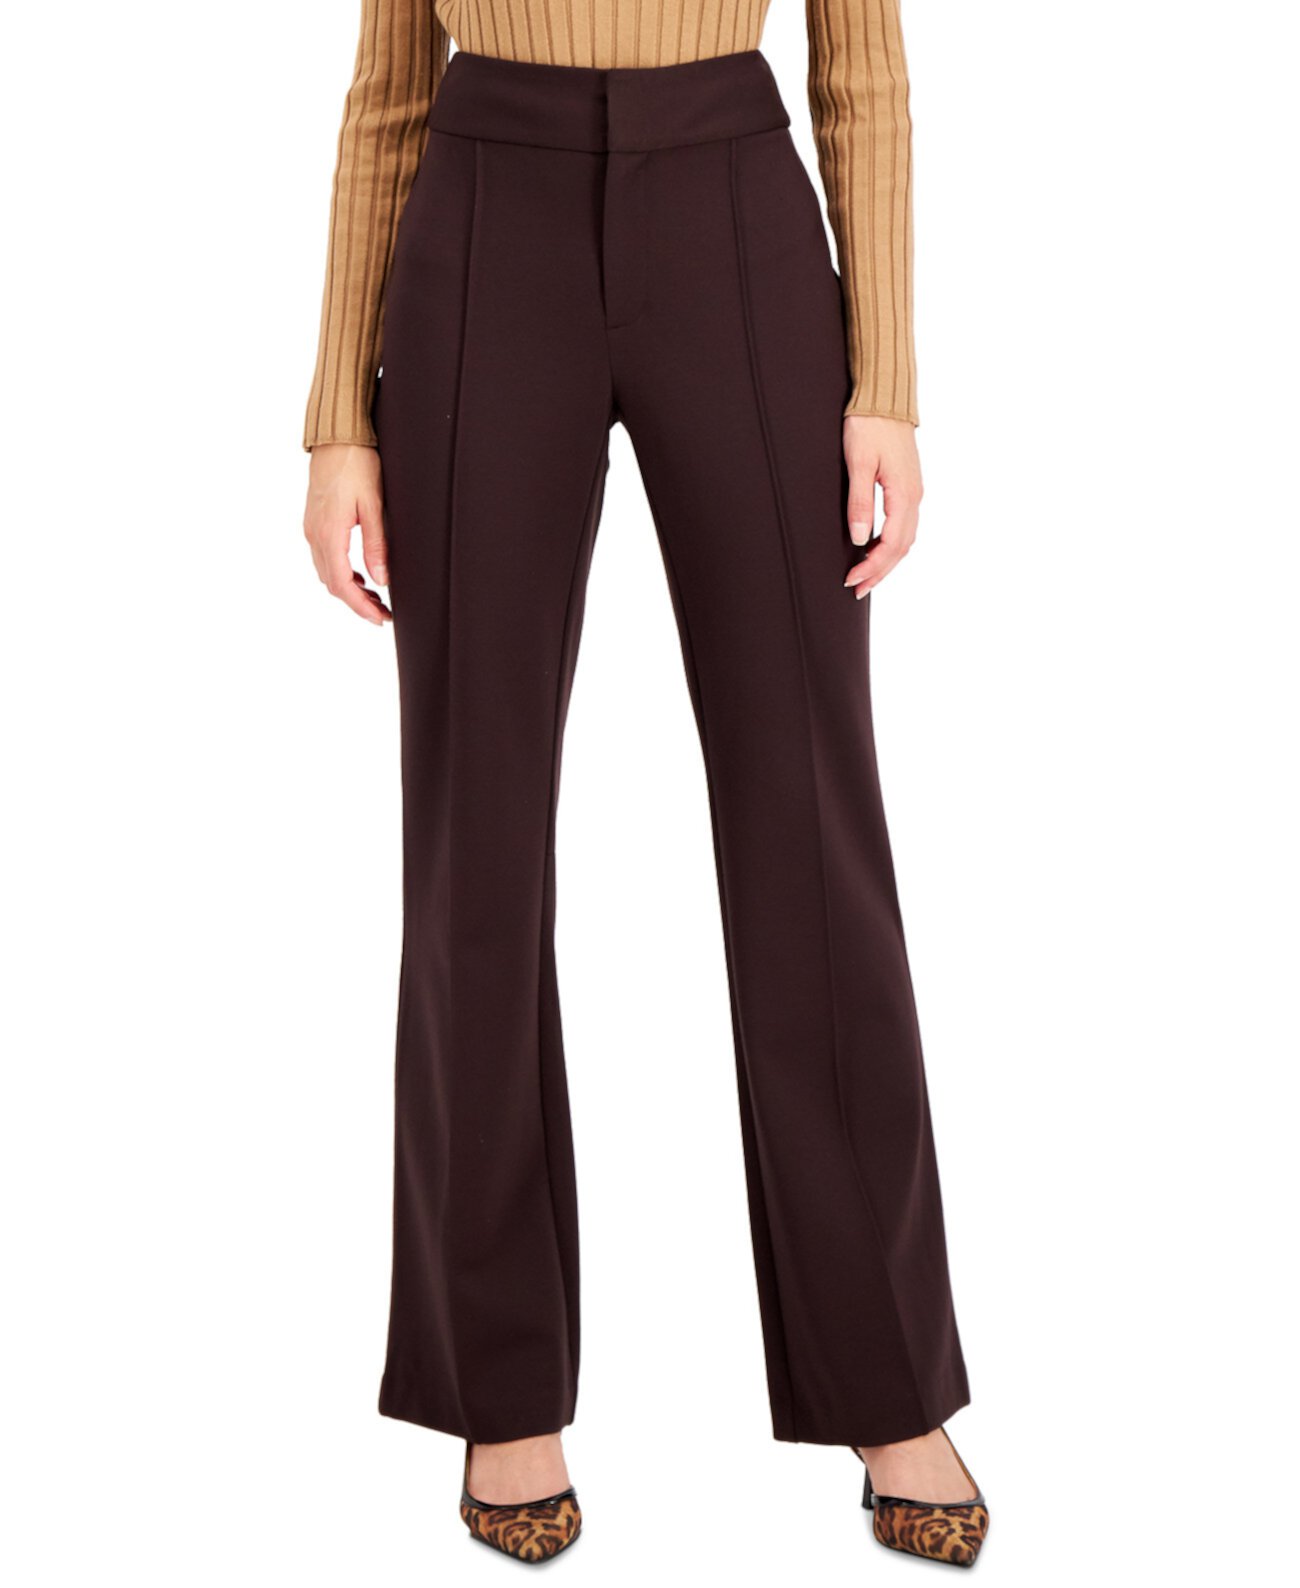 INC High-Rise Boot Pants, Created for Macy's INC International Concepts